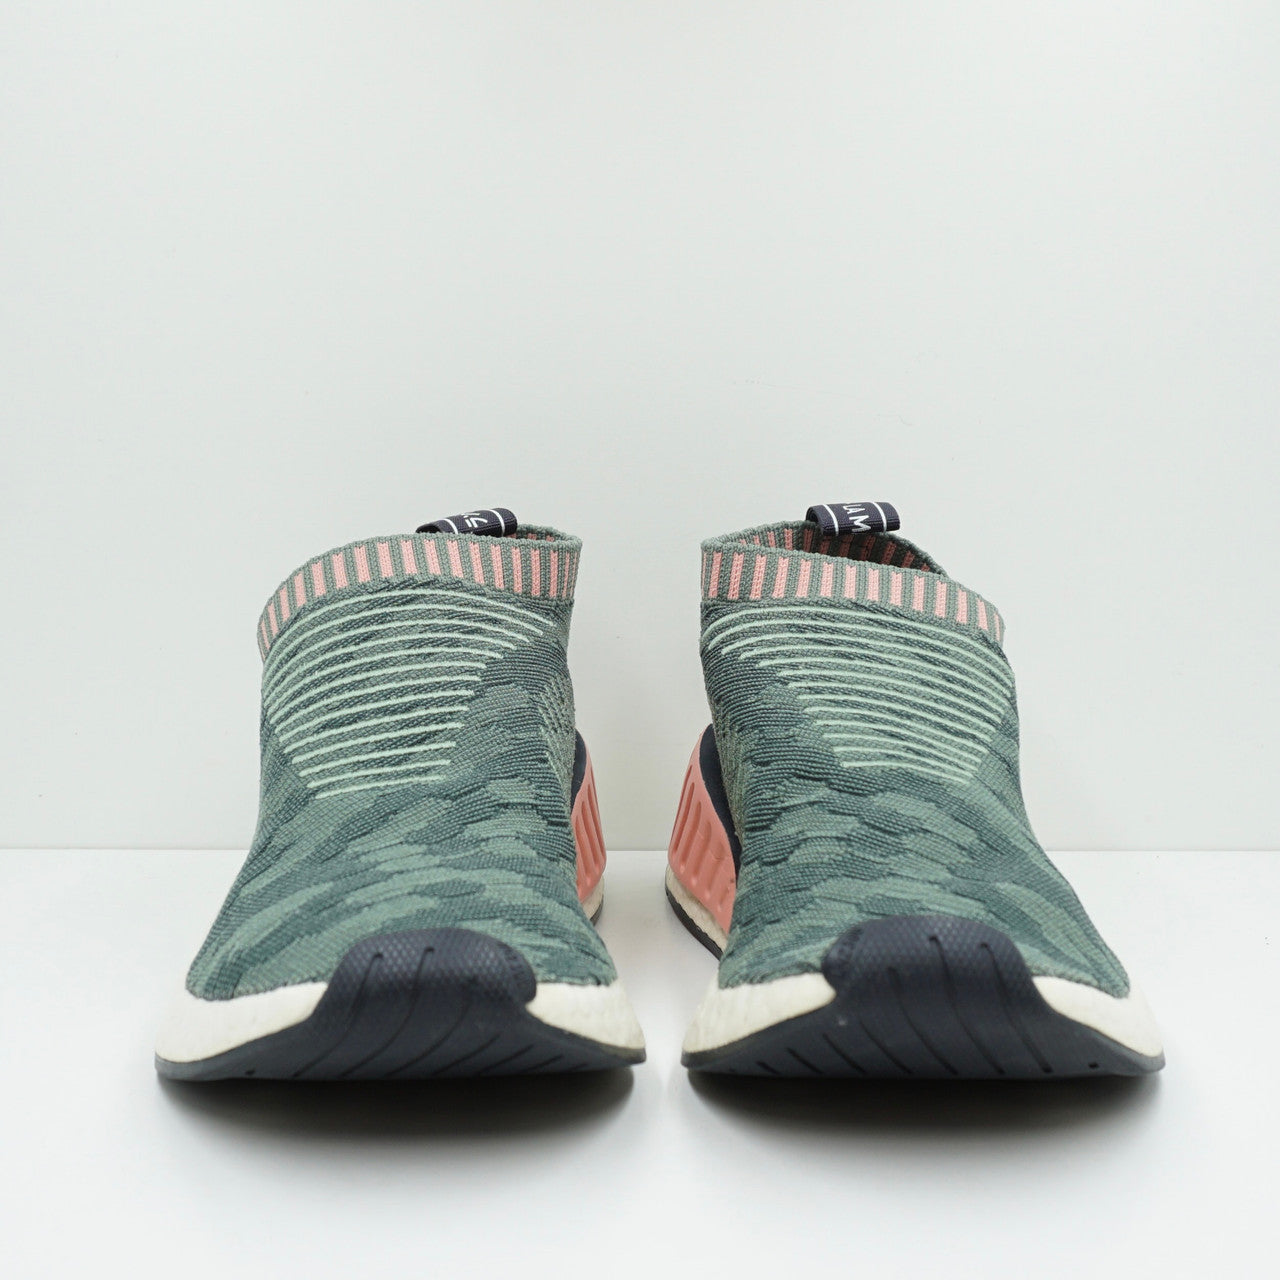 Adidas NMD CS2 Trace Green Trace Pink (W)